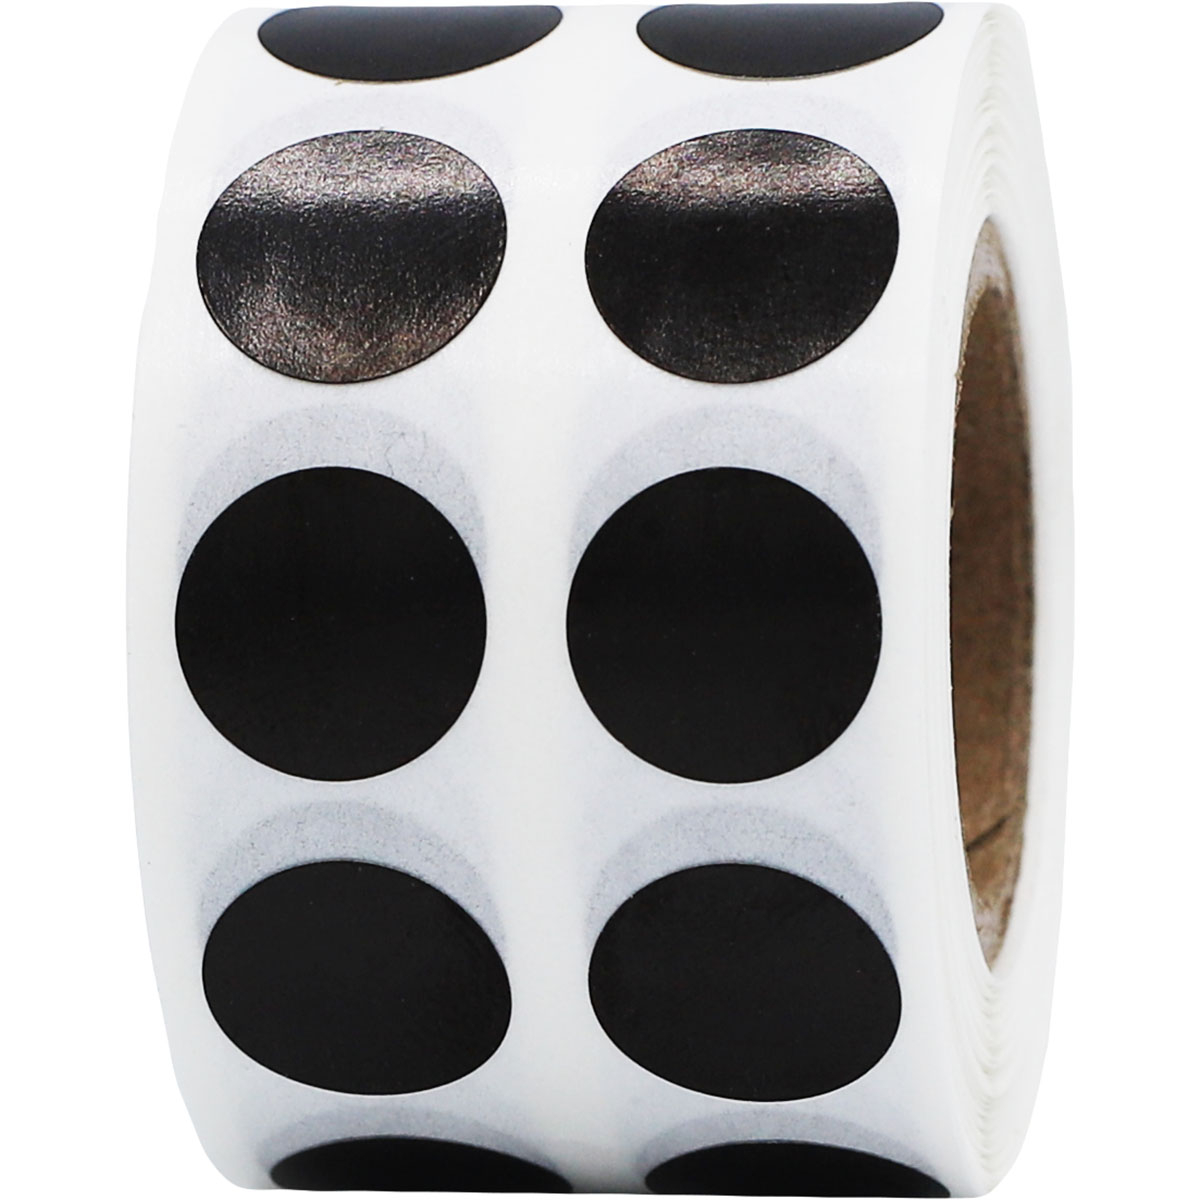 1/2 Permanent Round, Color-Code Dots: 1,200/Pack - Black